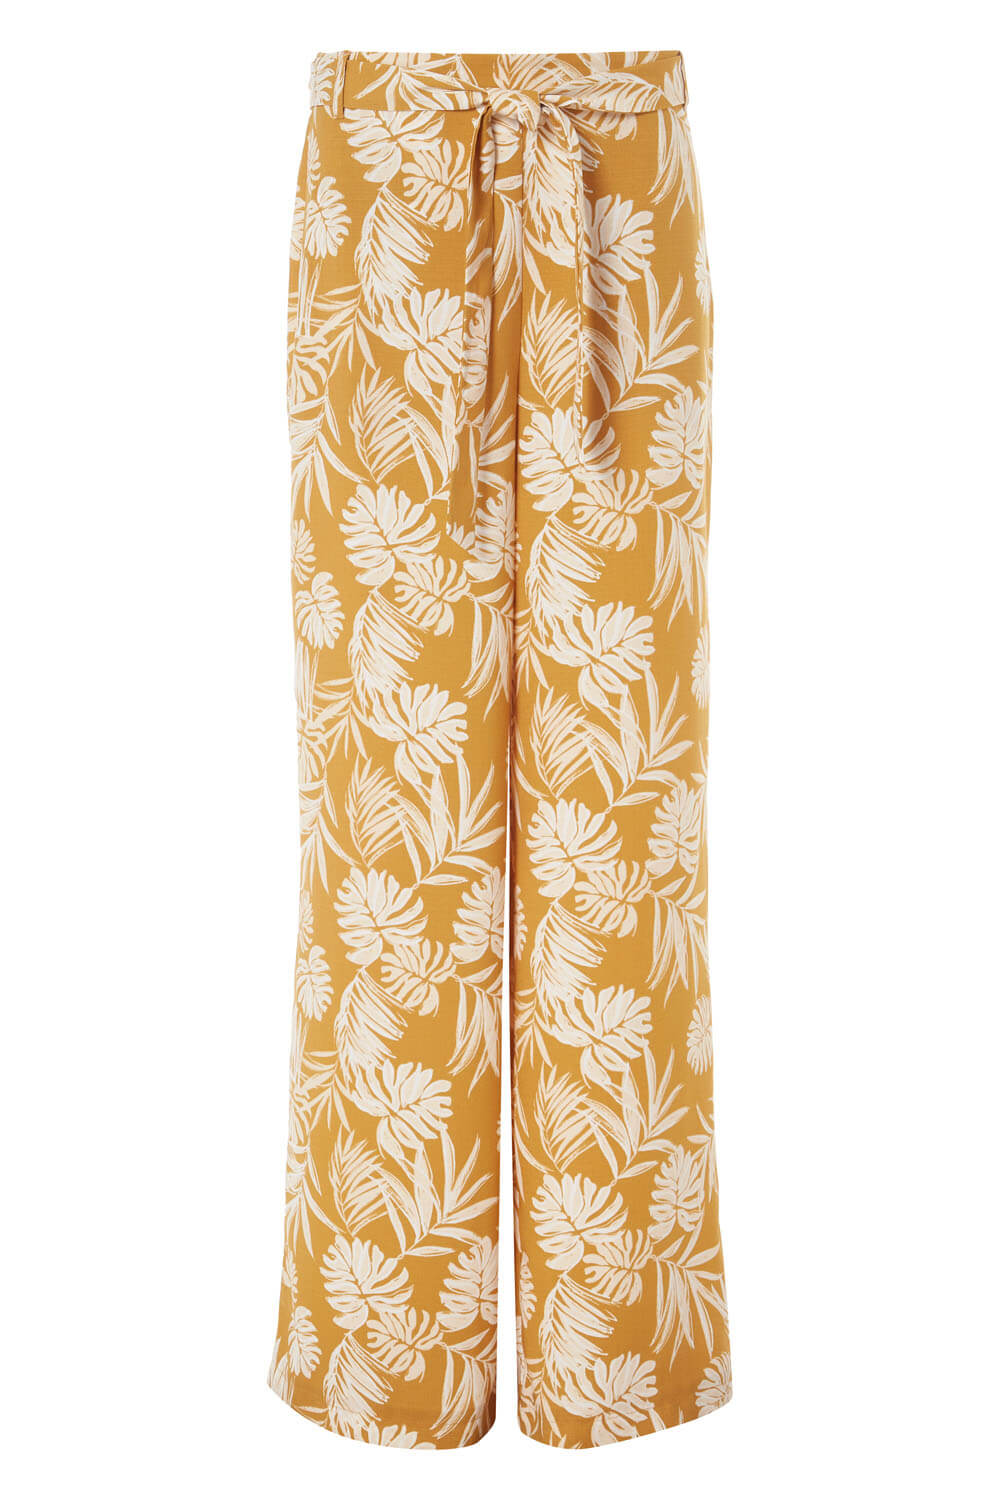 Yellow Palm Print Wide Leg Trousers , Image 5 of 5